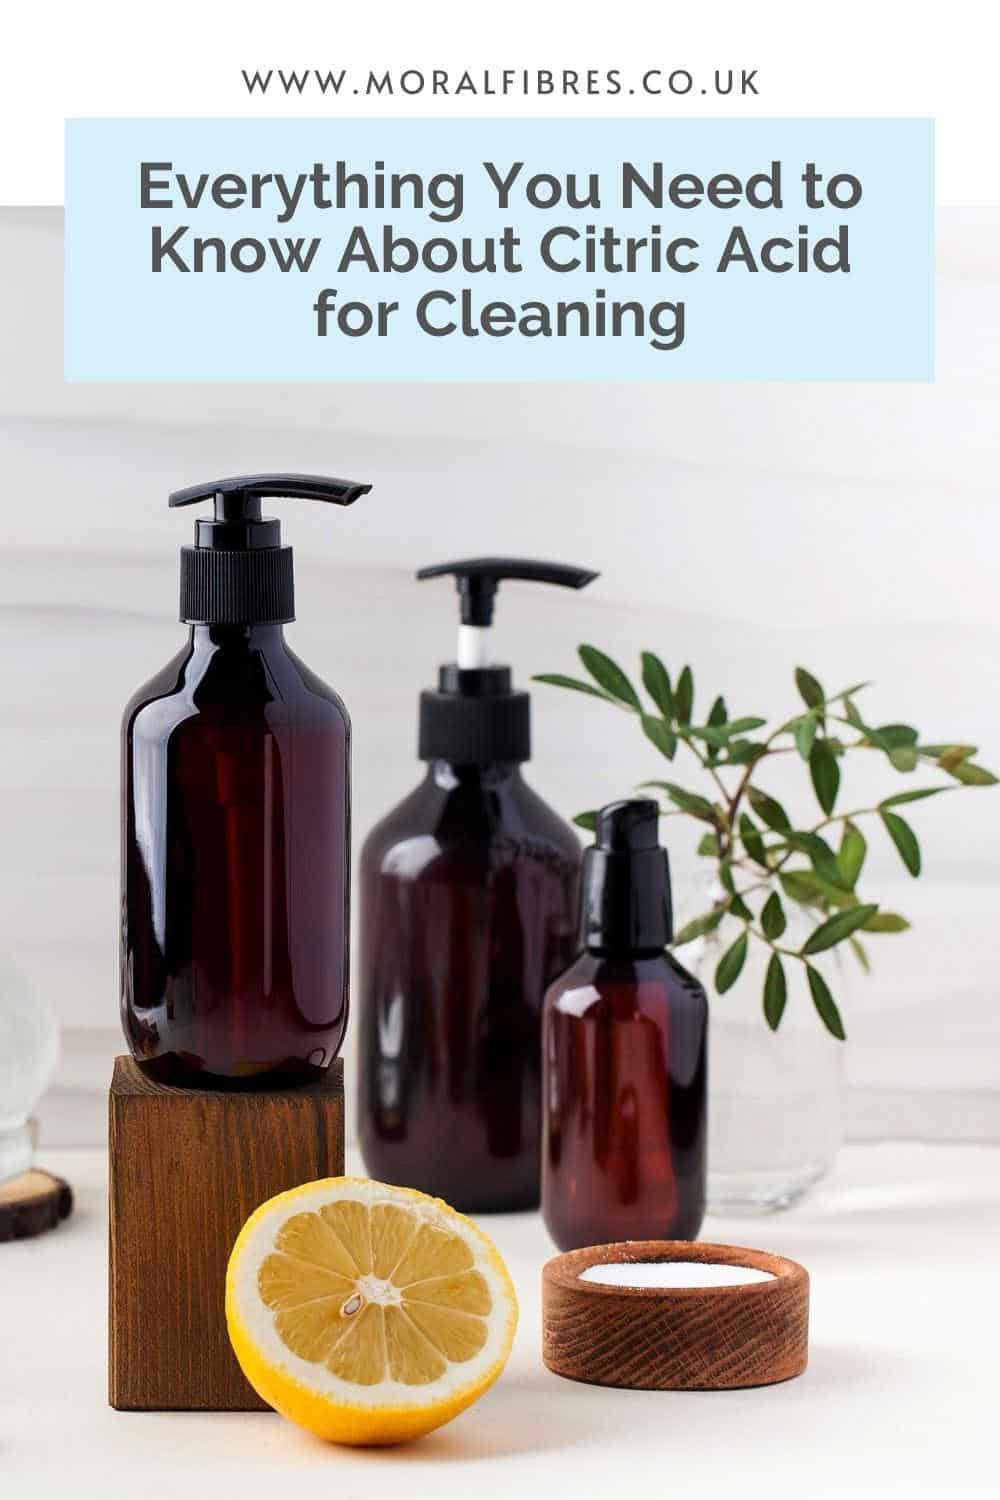 Uses of citric acid in the home  Cleaning recipes, Homemade cleaning  products, Diy cleaning products